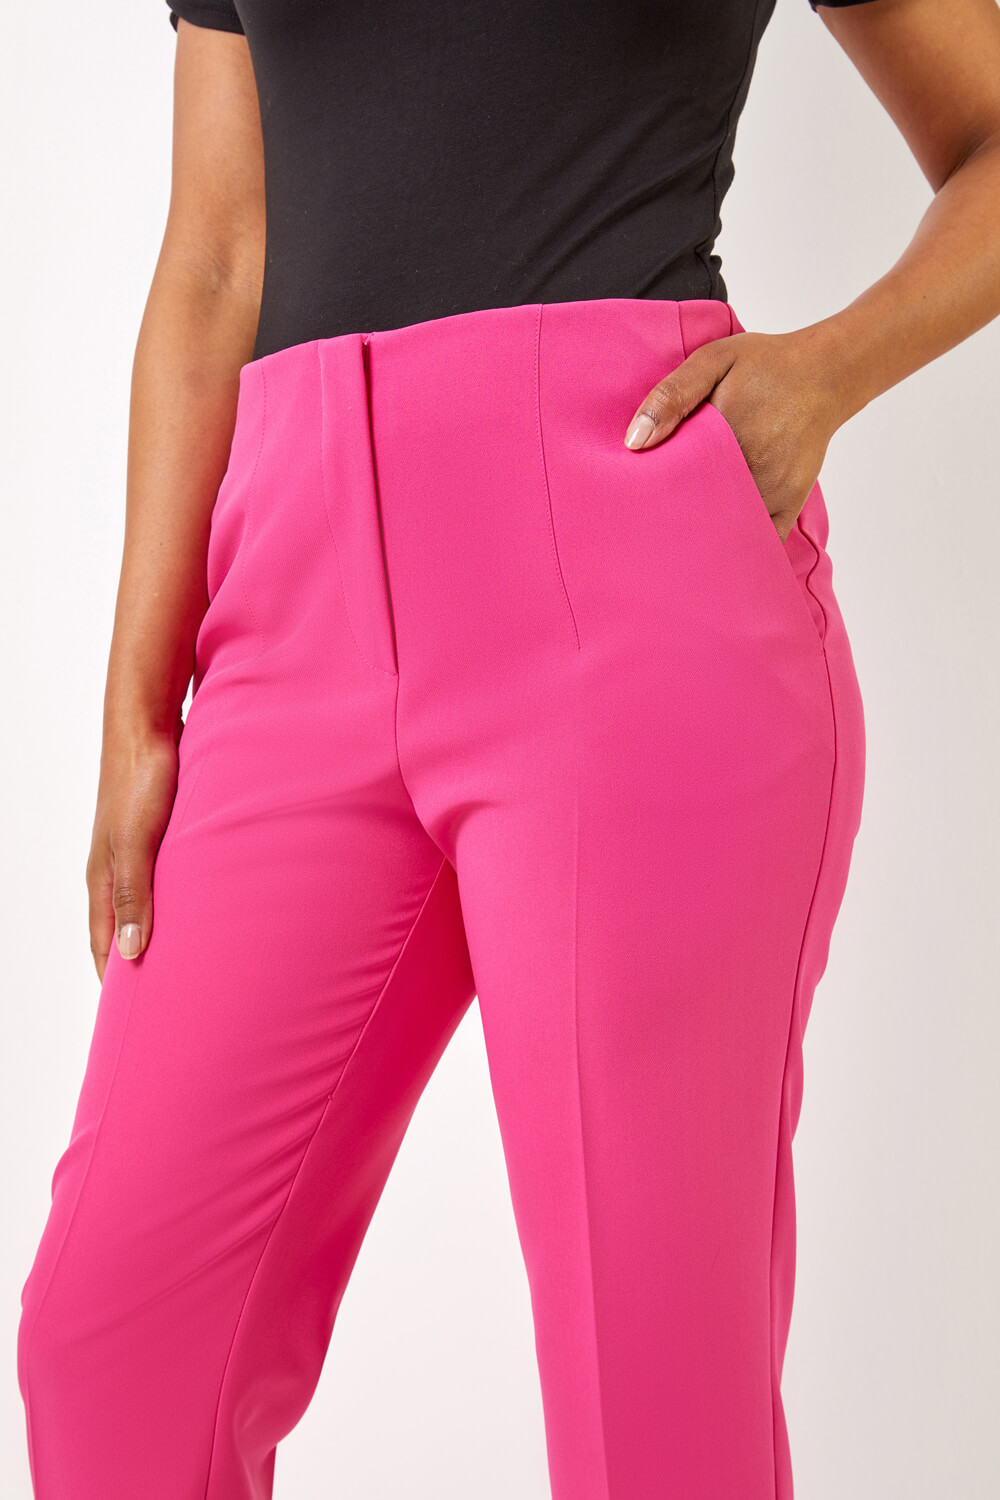 PINK Petite Soft Jersey Tapered Trouser, Image 3 of 4